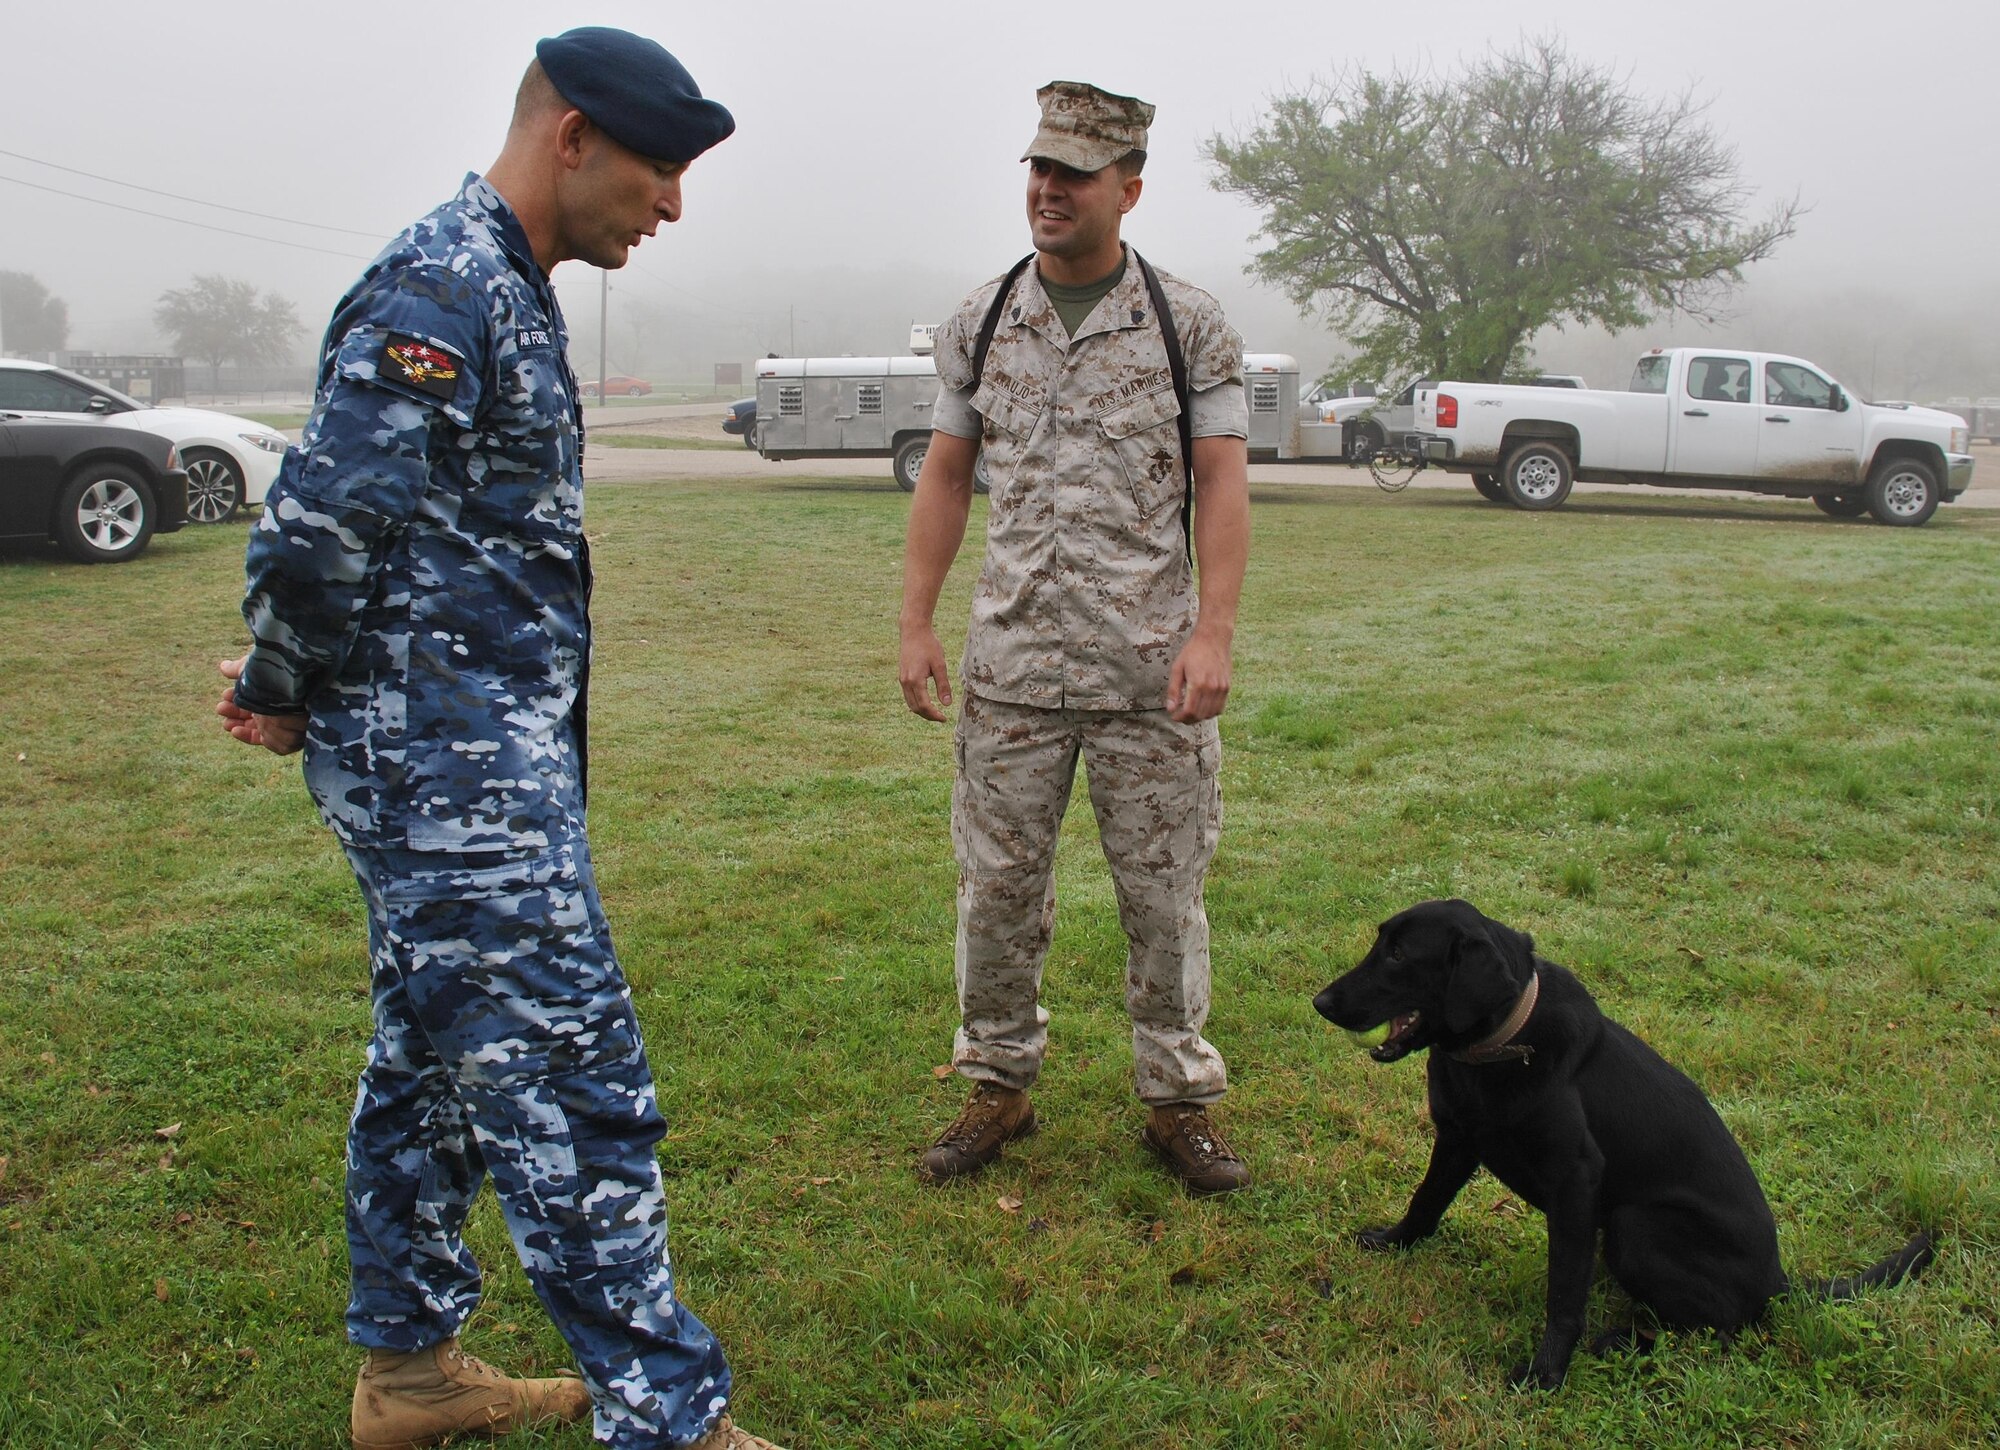 U.S. Marine Corps Sgt. Joshua Araujo, chief handler for military working dog Jaye, briefs Royal Australian Air Force Group Capt. Wayne Kelly during a detection demonstration at the Department of Defense Military Working Dog School, Joint Base San Antonio-Lackland, Texas. During Kelly's visit, Arajuo explained U.S. Air Force MWD procedures and techniques. (U.S. Air Force photo/Carole Chiles Fuller/Released)